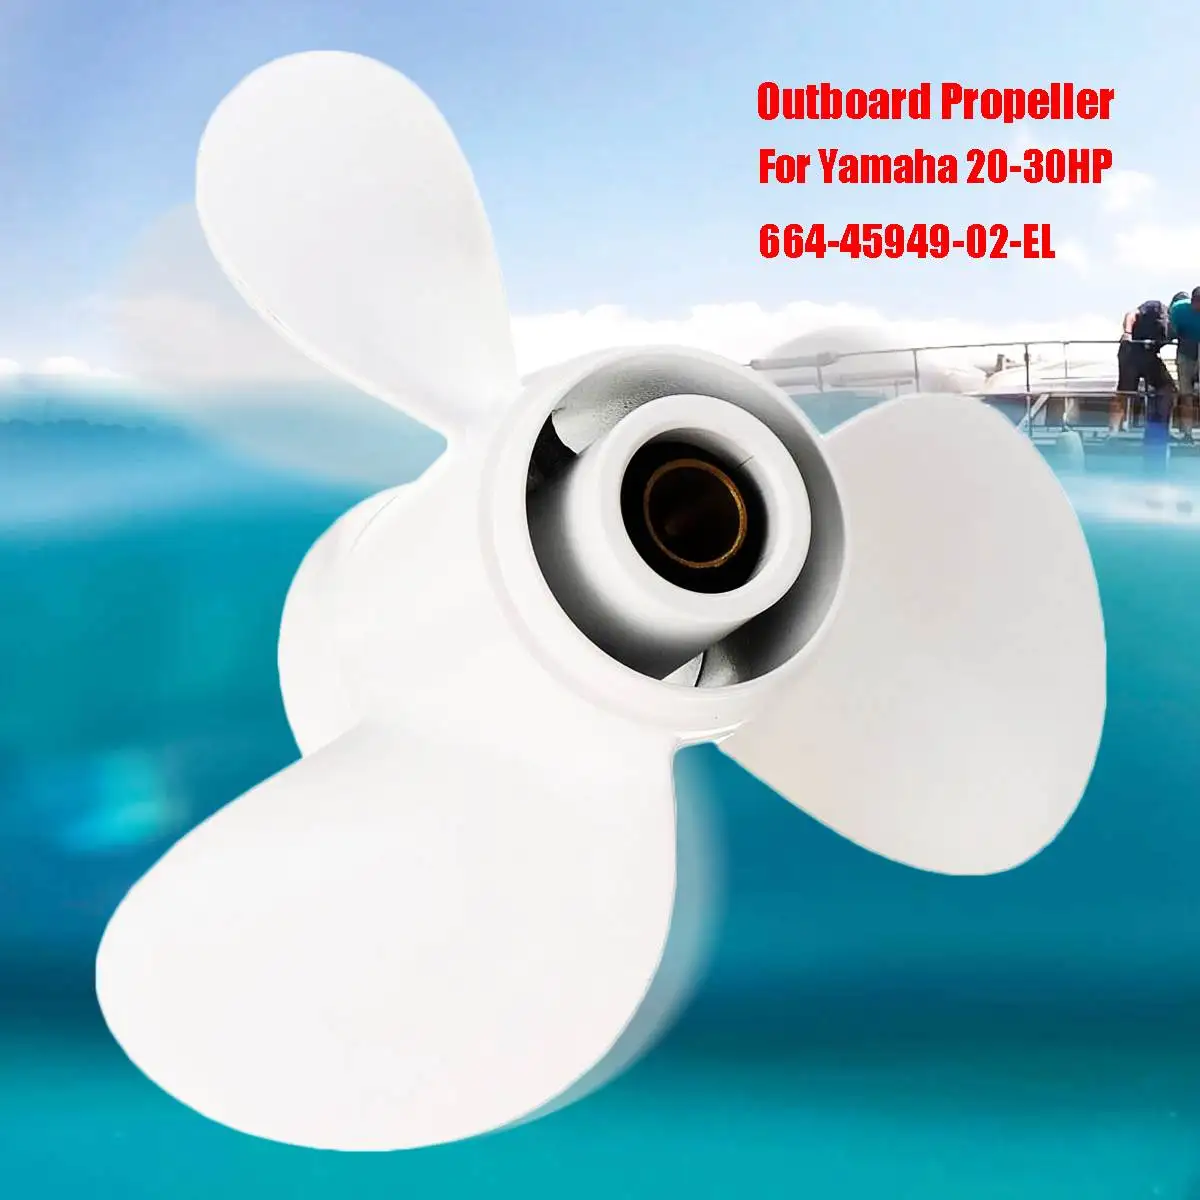 9 7/8 x 13 Marine Boat Outboard Propeller For Yamaha 20-30HP 664-45949-02-EL Aluminum Alloy White 3 Blades 10 Spline Tooth